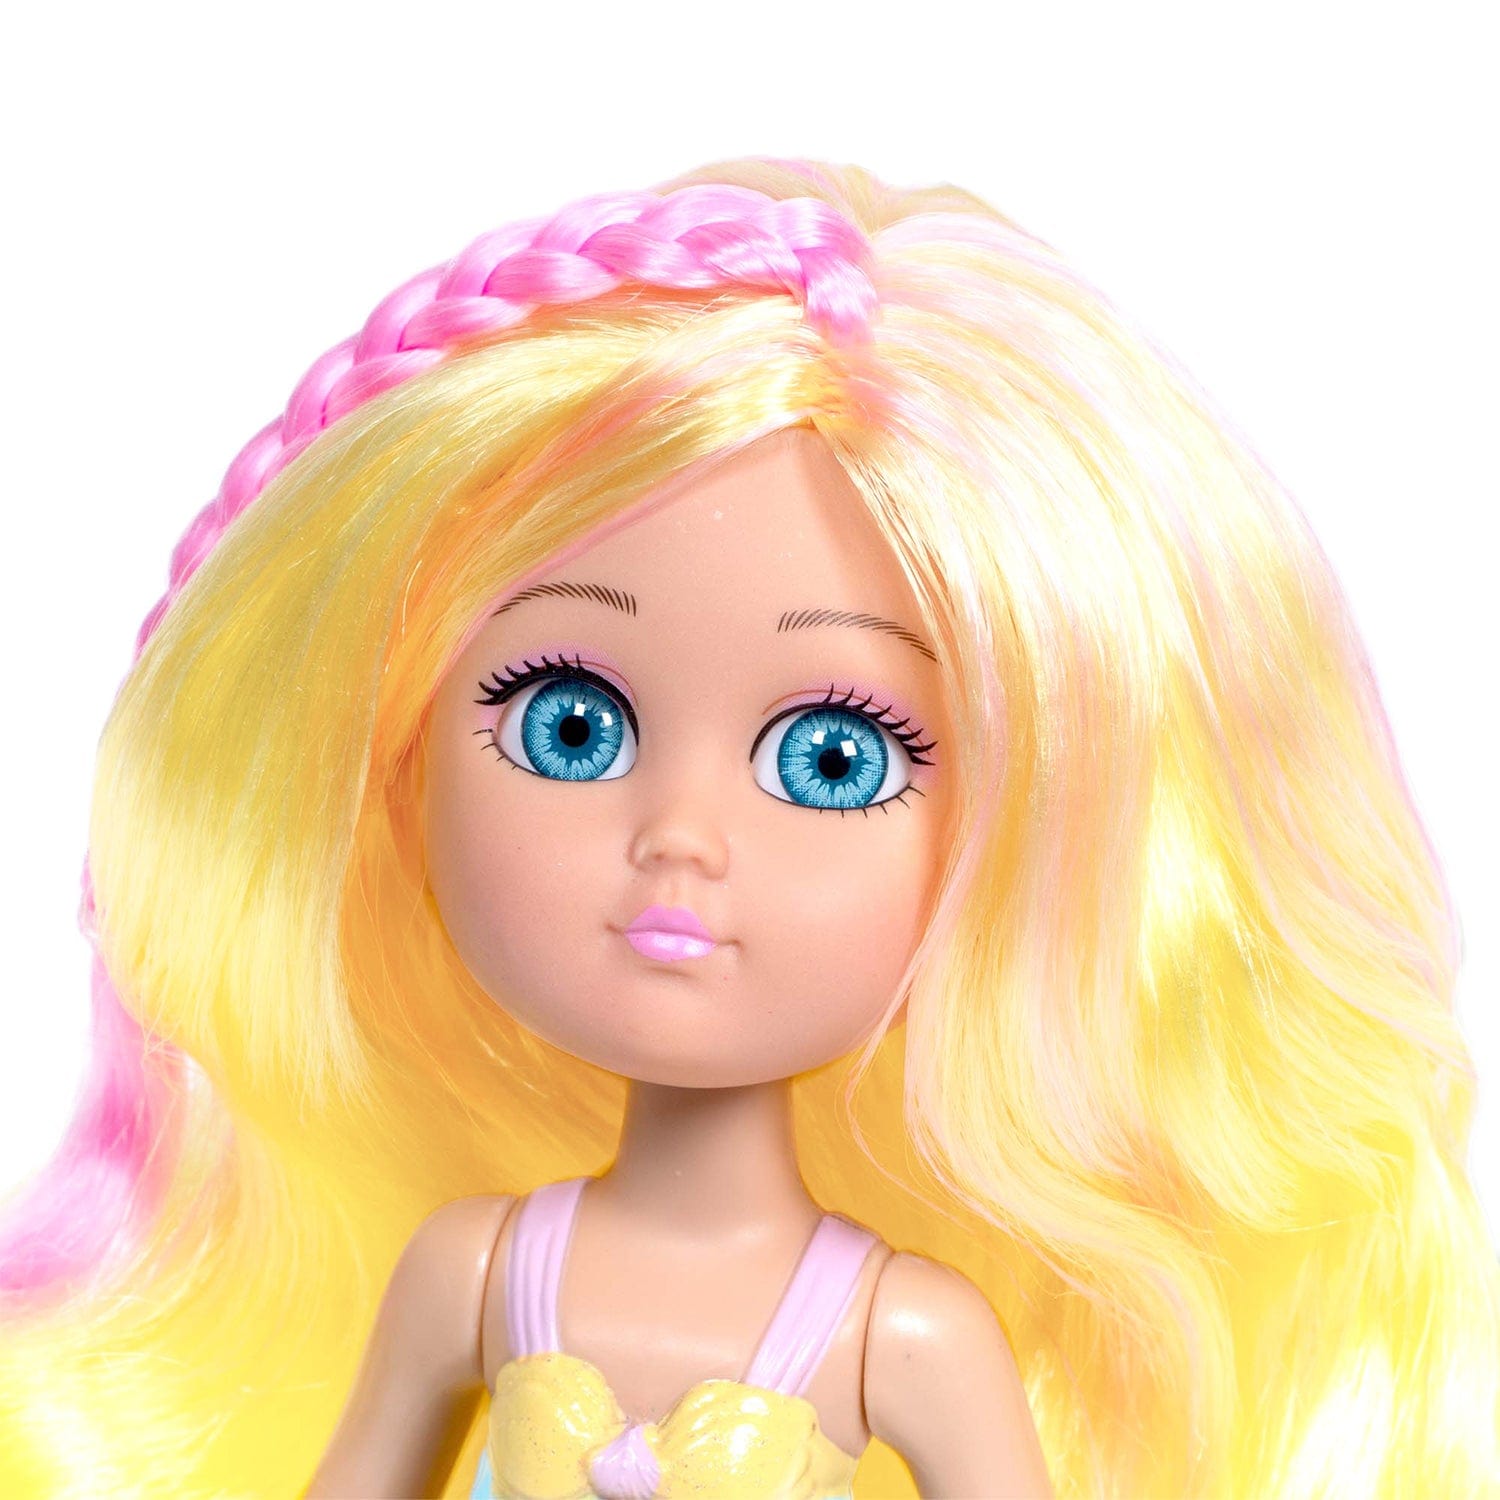 Water Wonder Sandy mermaid doll has brightly colored yellow hair with pink highlights, a glittery yellow bikini top, and blue ruffle accents. Her beautiful mermaid doll tail changes from yellow to red when she’s swimming in cold water. Ages 1+.